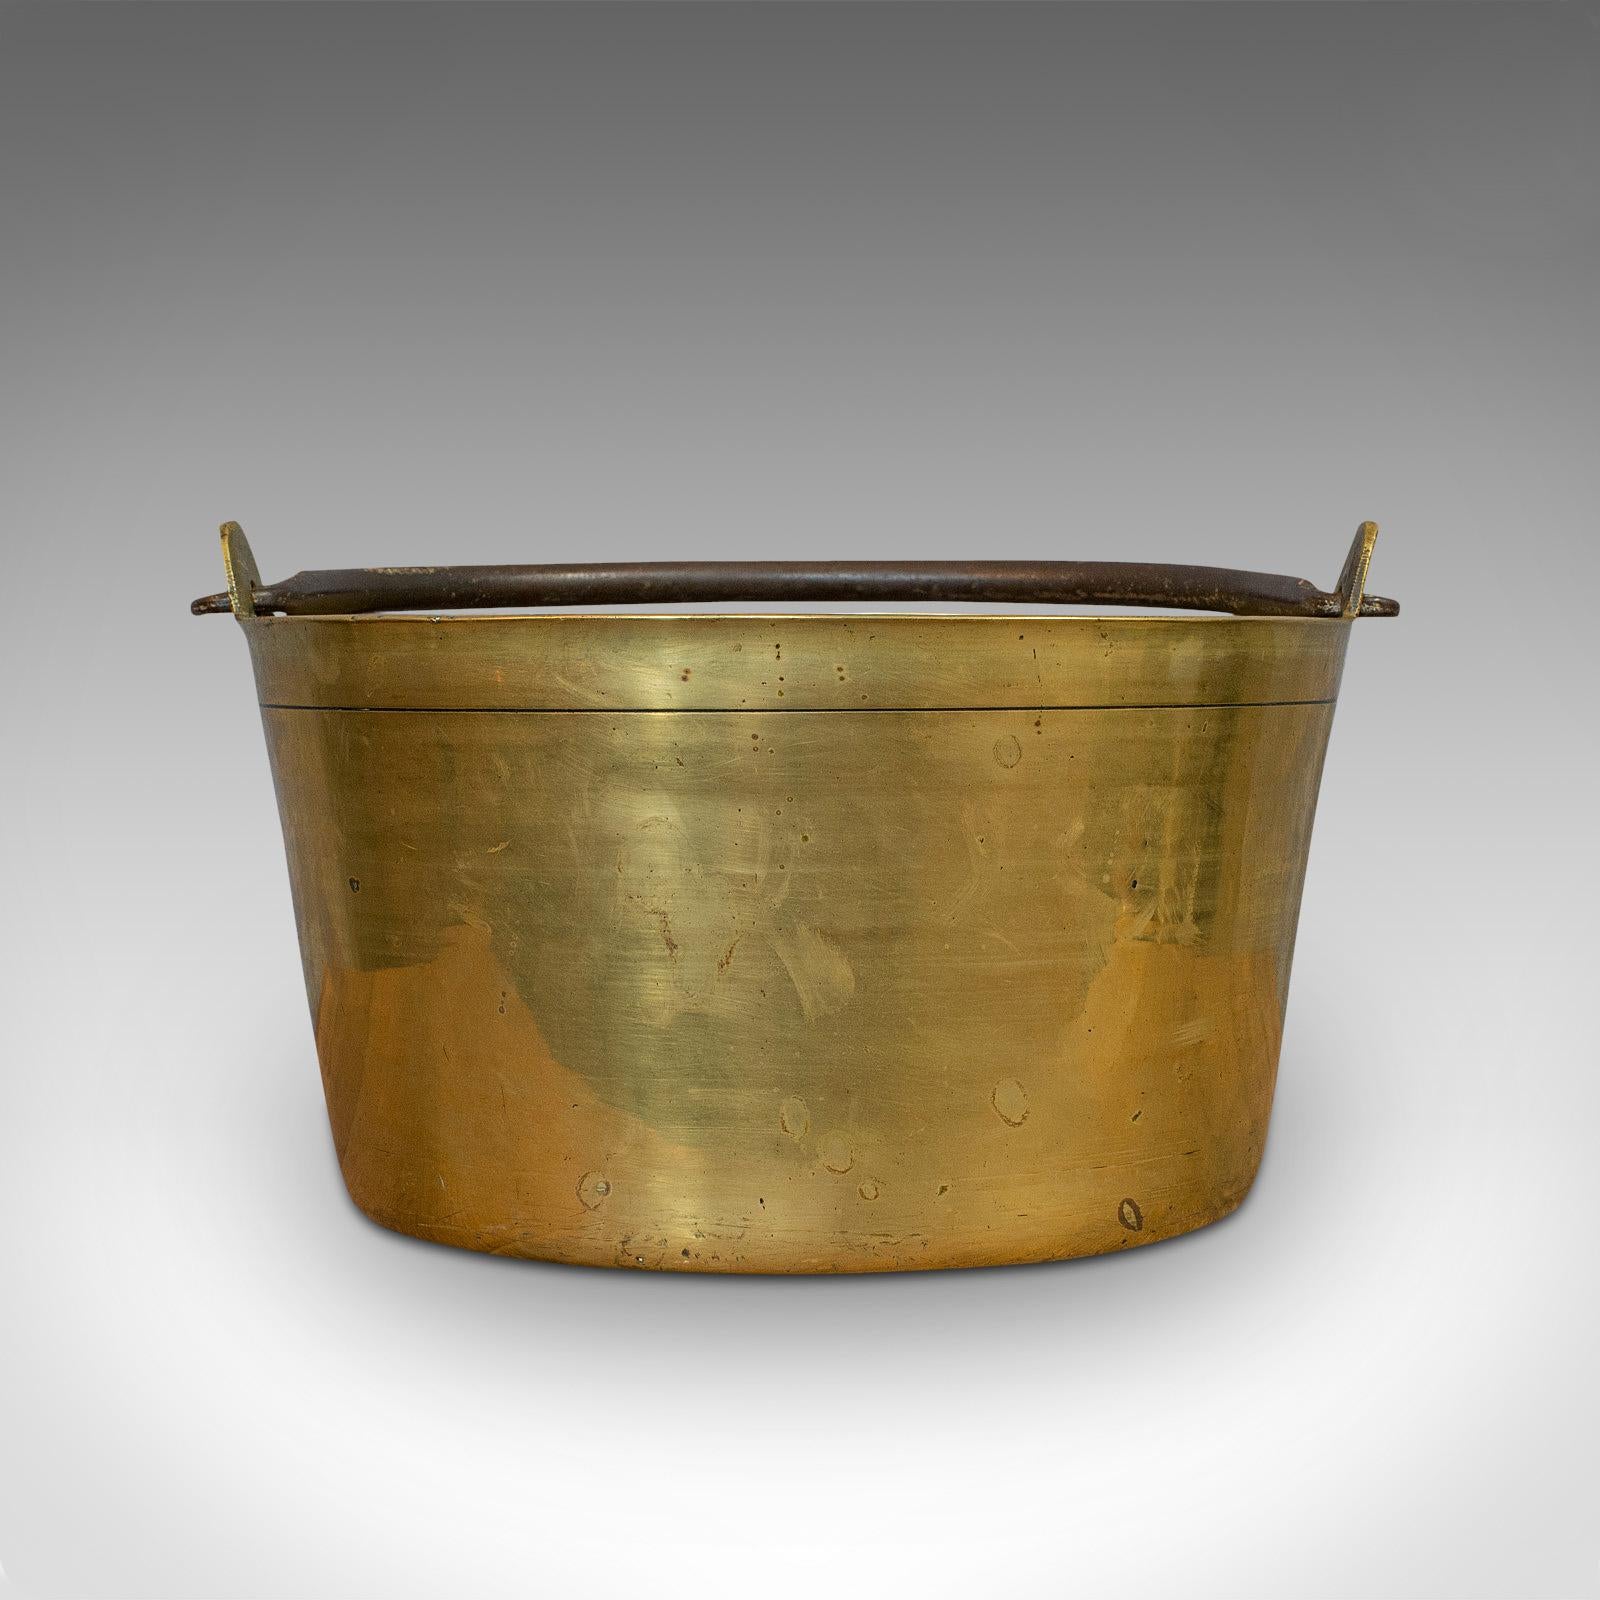 This is an antique jam pan. A French, solid brass artisan kitchen pot, dating to the late Victorian period, circa 1900.

Quality, French small batch cookware
Displaying a desirable aged patina - pleasing weathering to the exterior
Solid brass